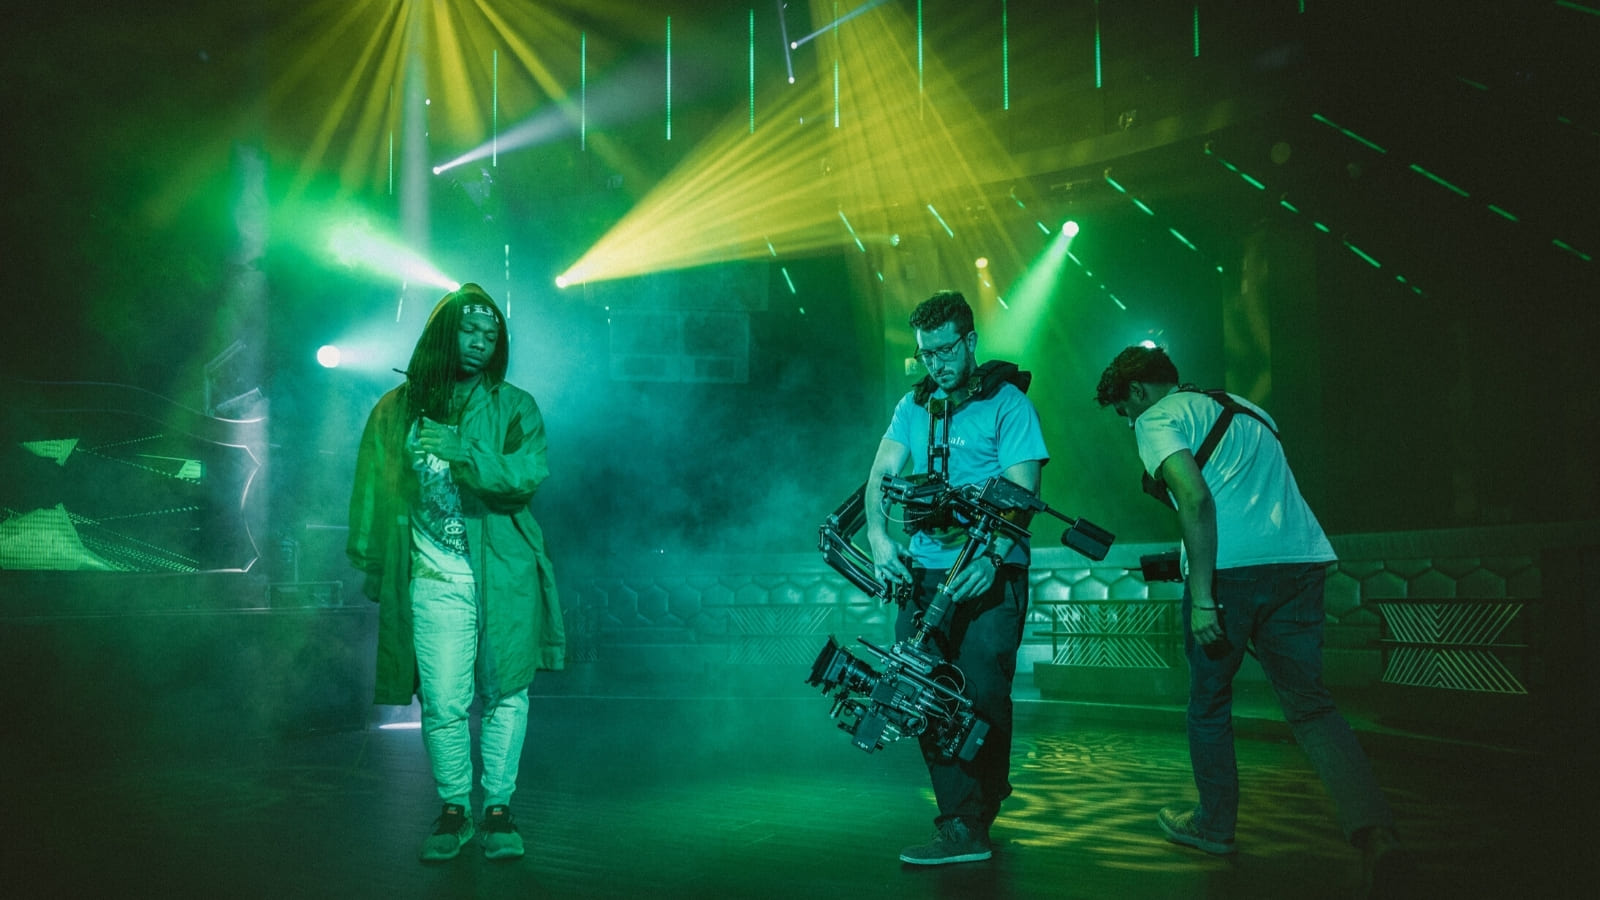 A camera operator and a member of film crew stand next to a performer in an arena style warehouse, filming what looks like a misty music video. The scene is tinged with green light